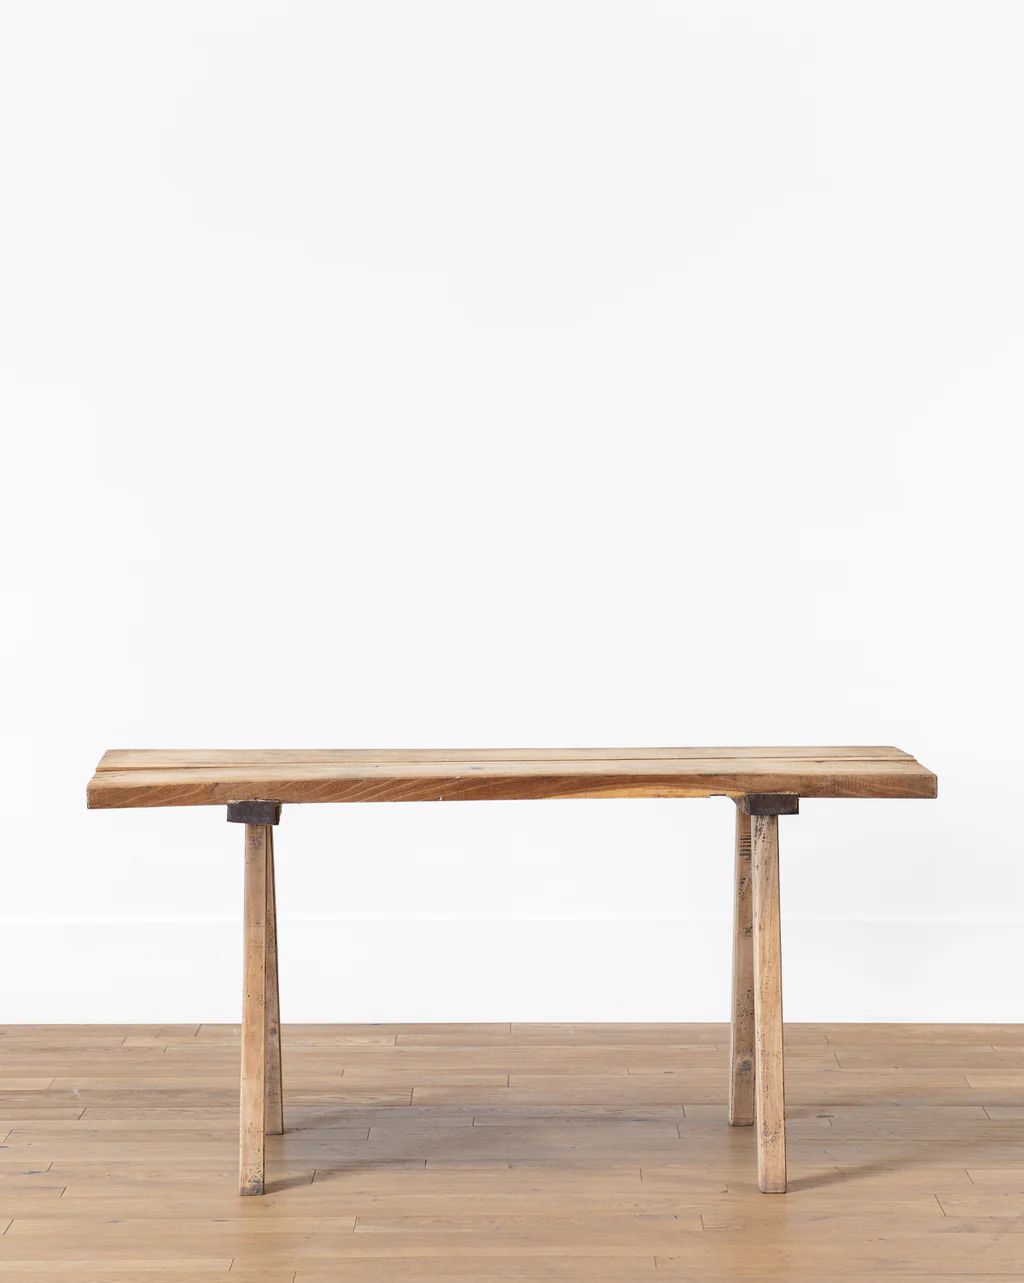 Vintage Distressed Wooden Console | McGee & Co.